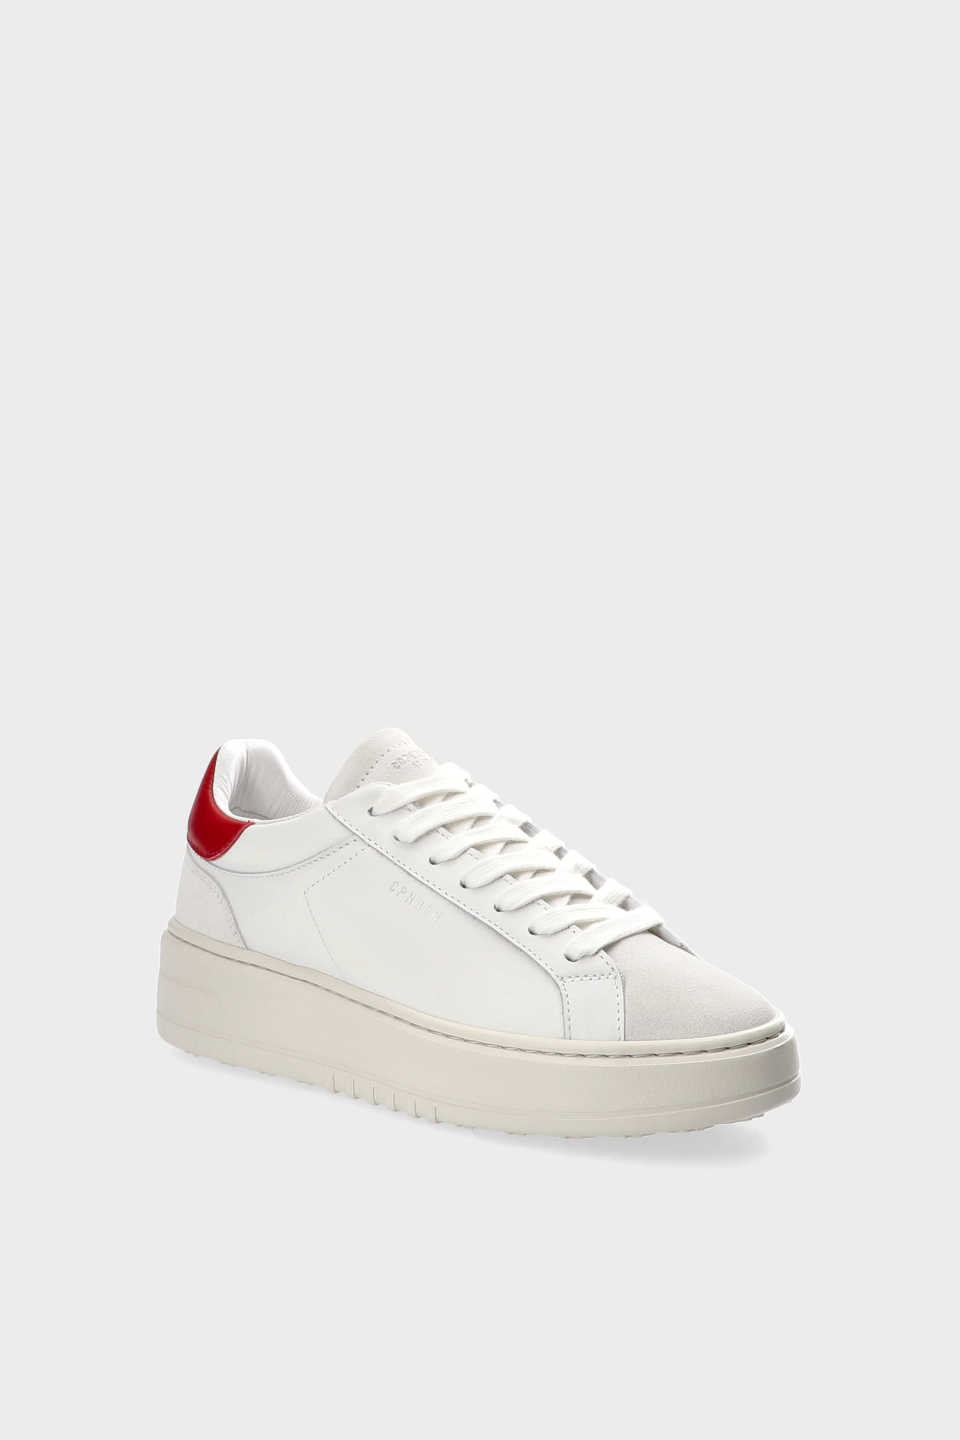 CPH72 leather mix white/red - alternative 2